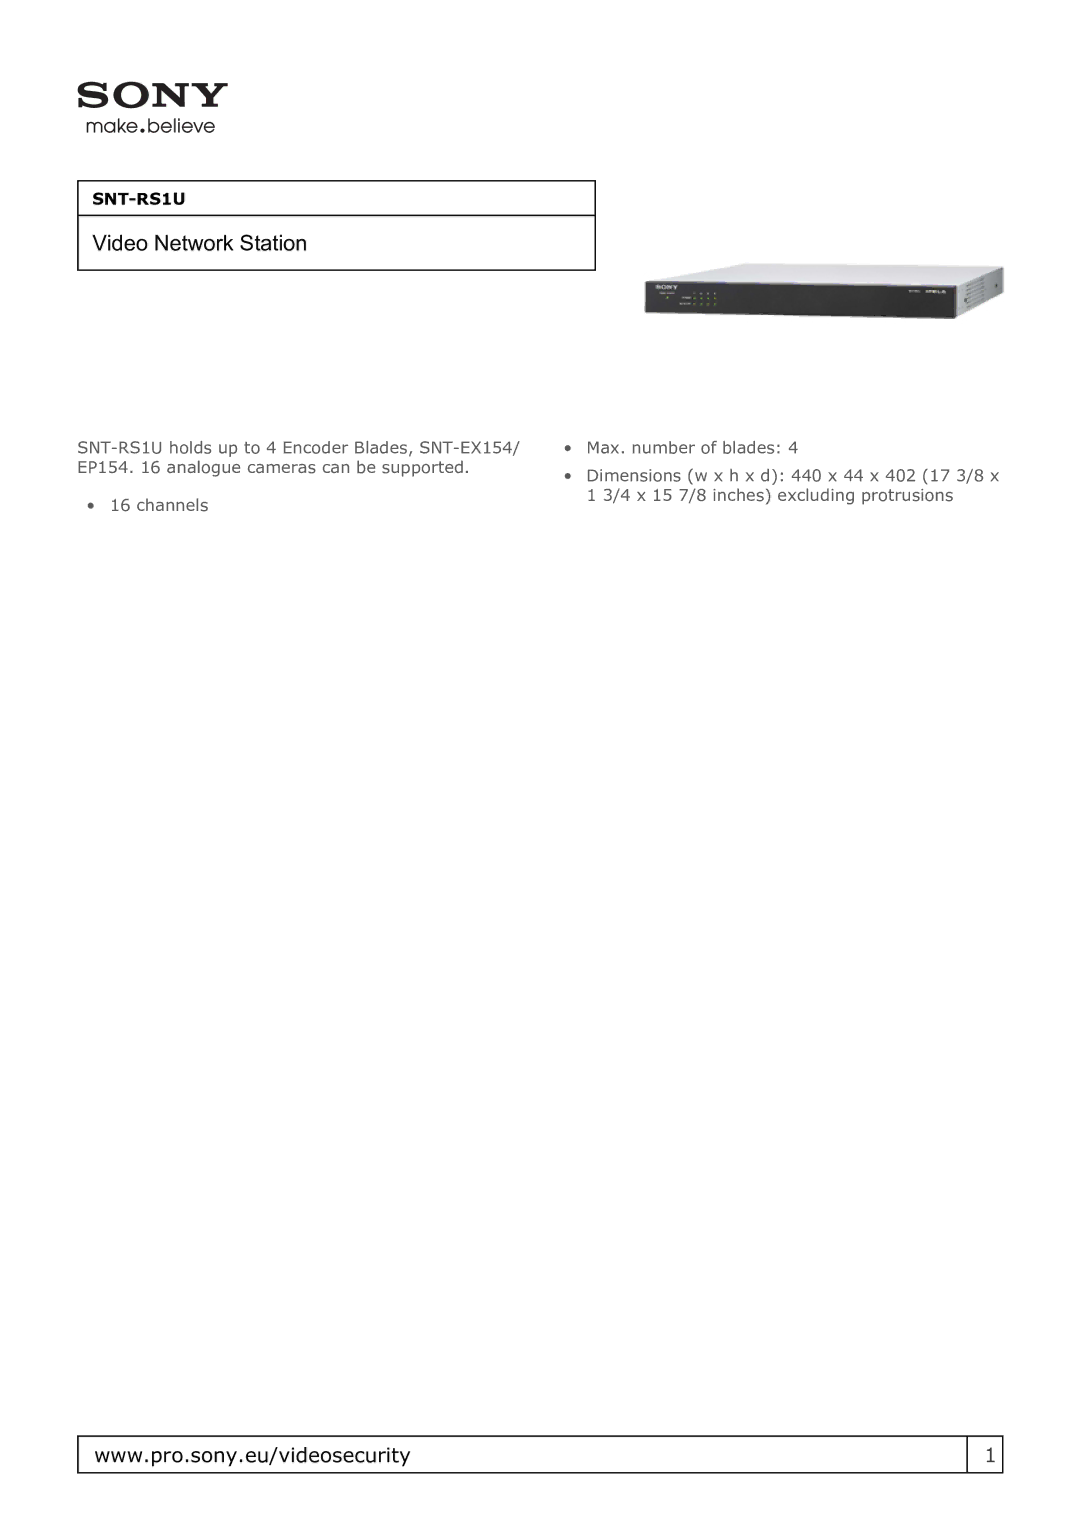 Sony SNTRS1U dimensions Video Network Station 